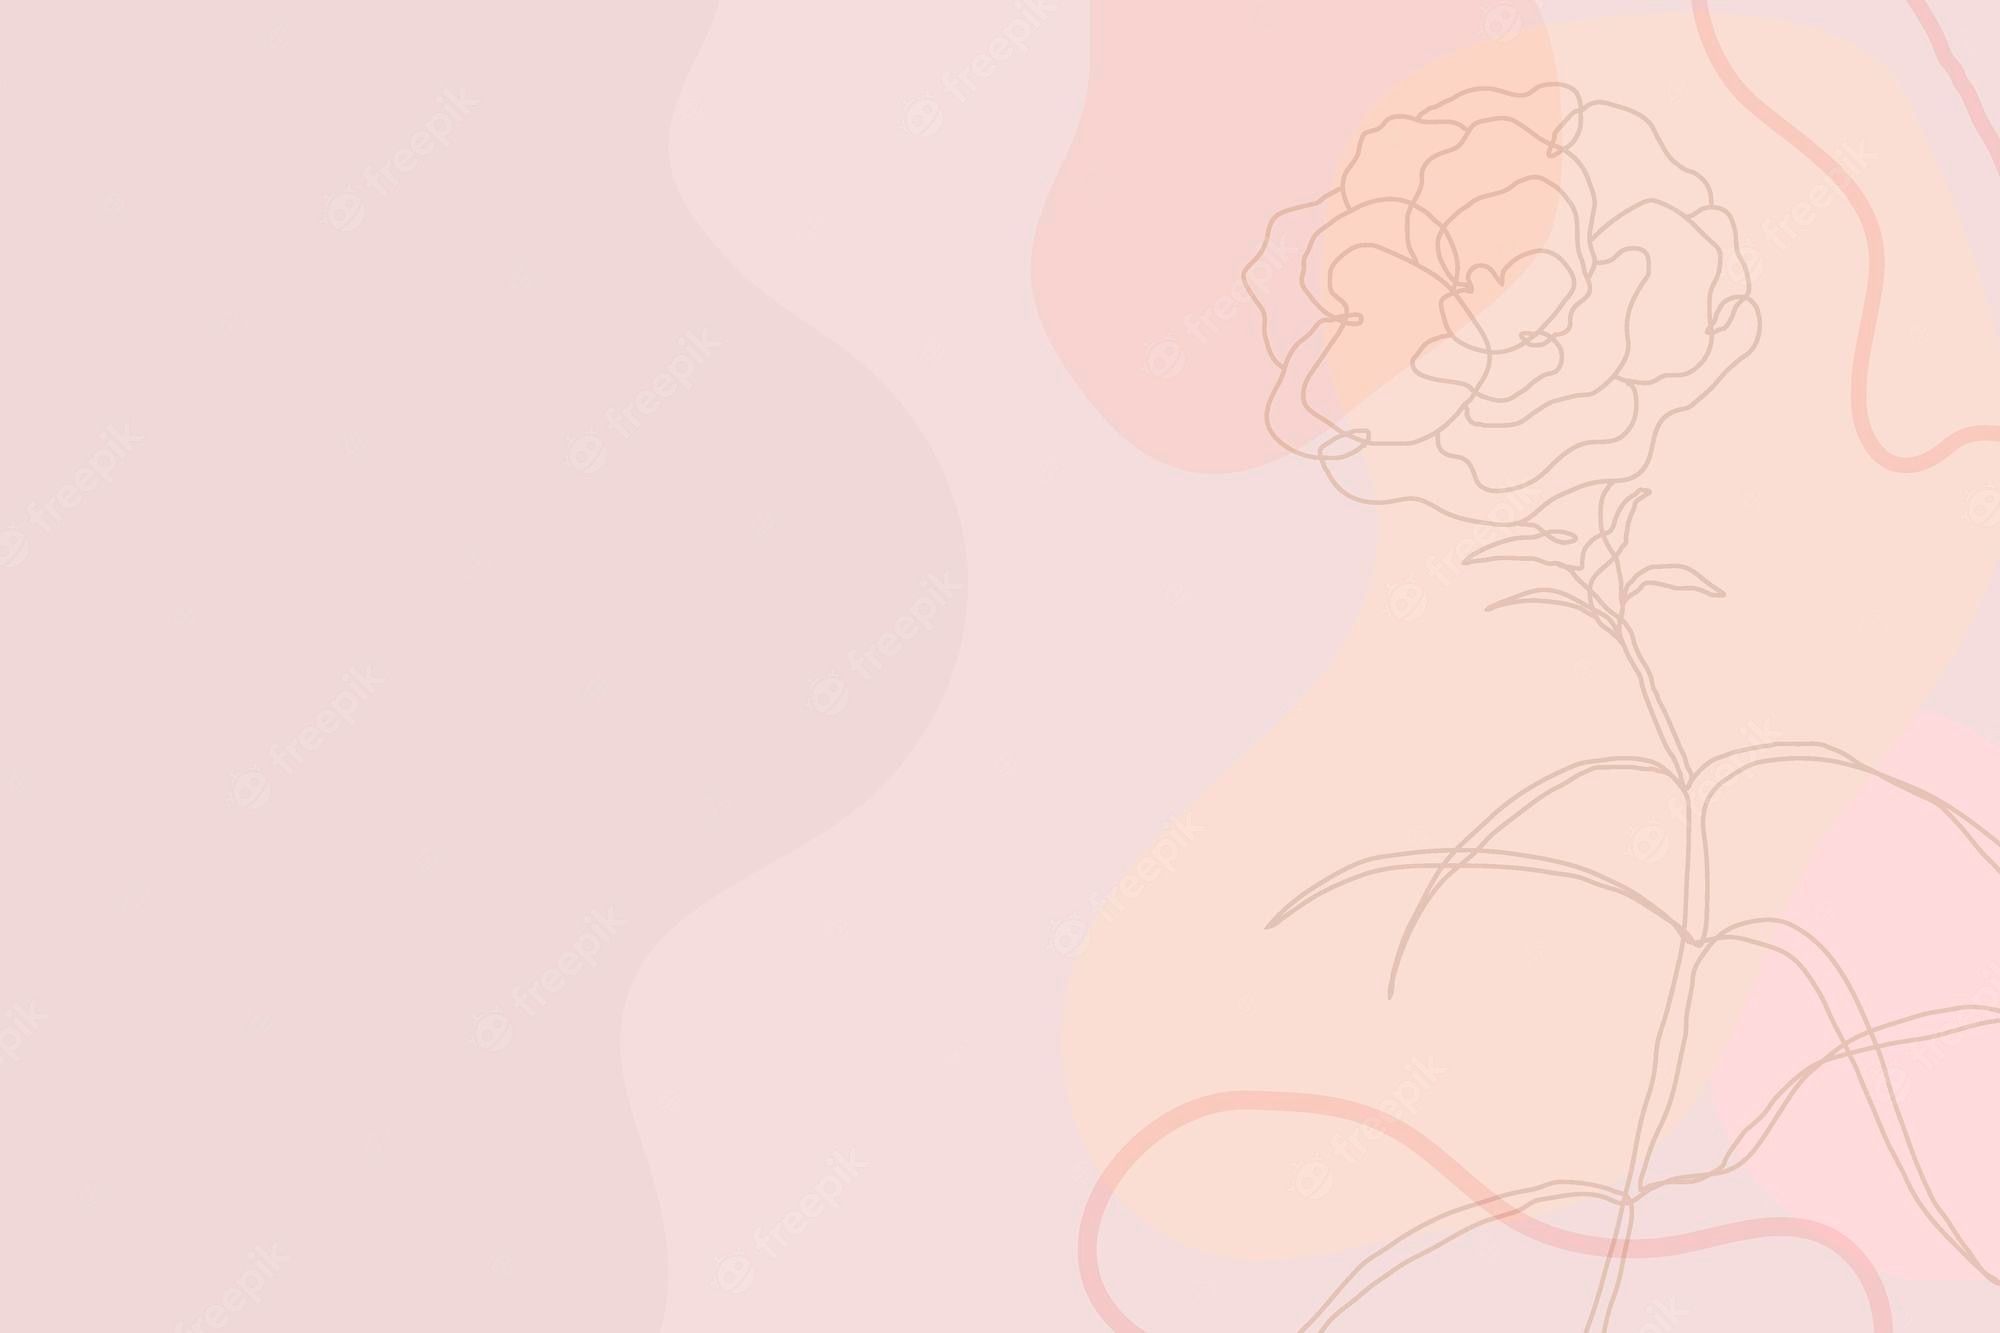 Aesthetic flower Vectors & Illustrations for Free Download